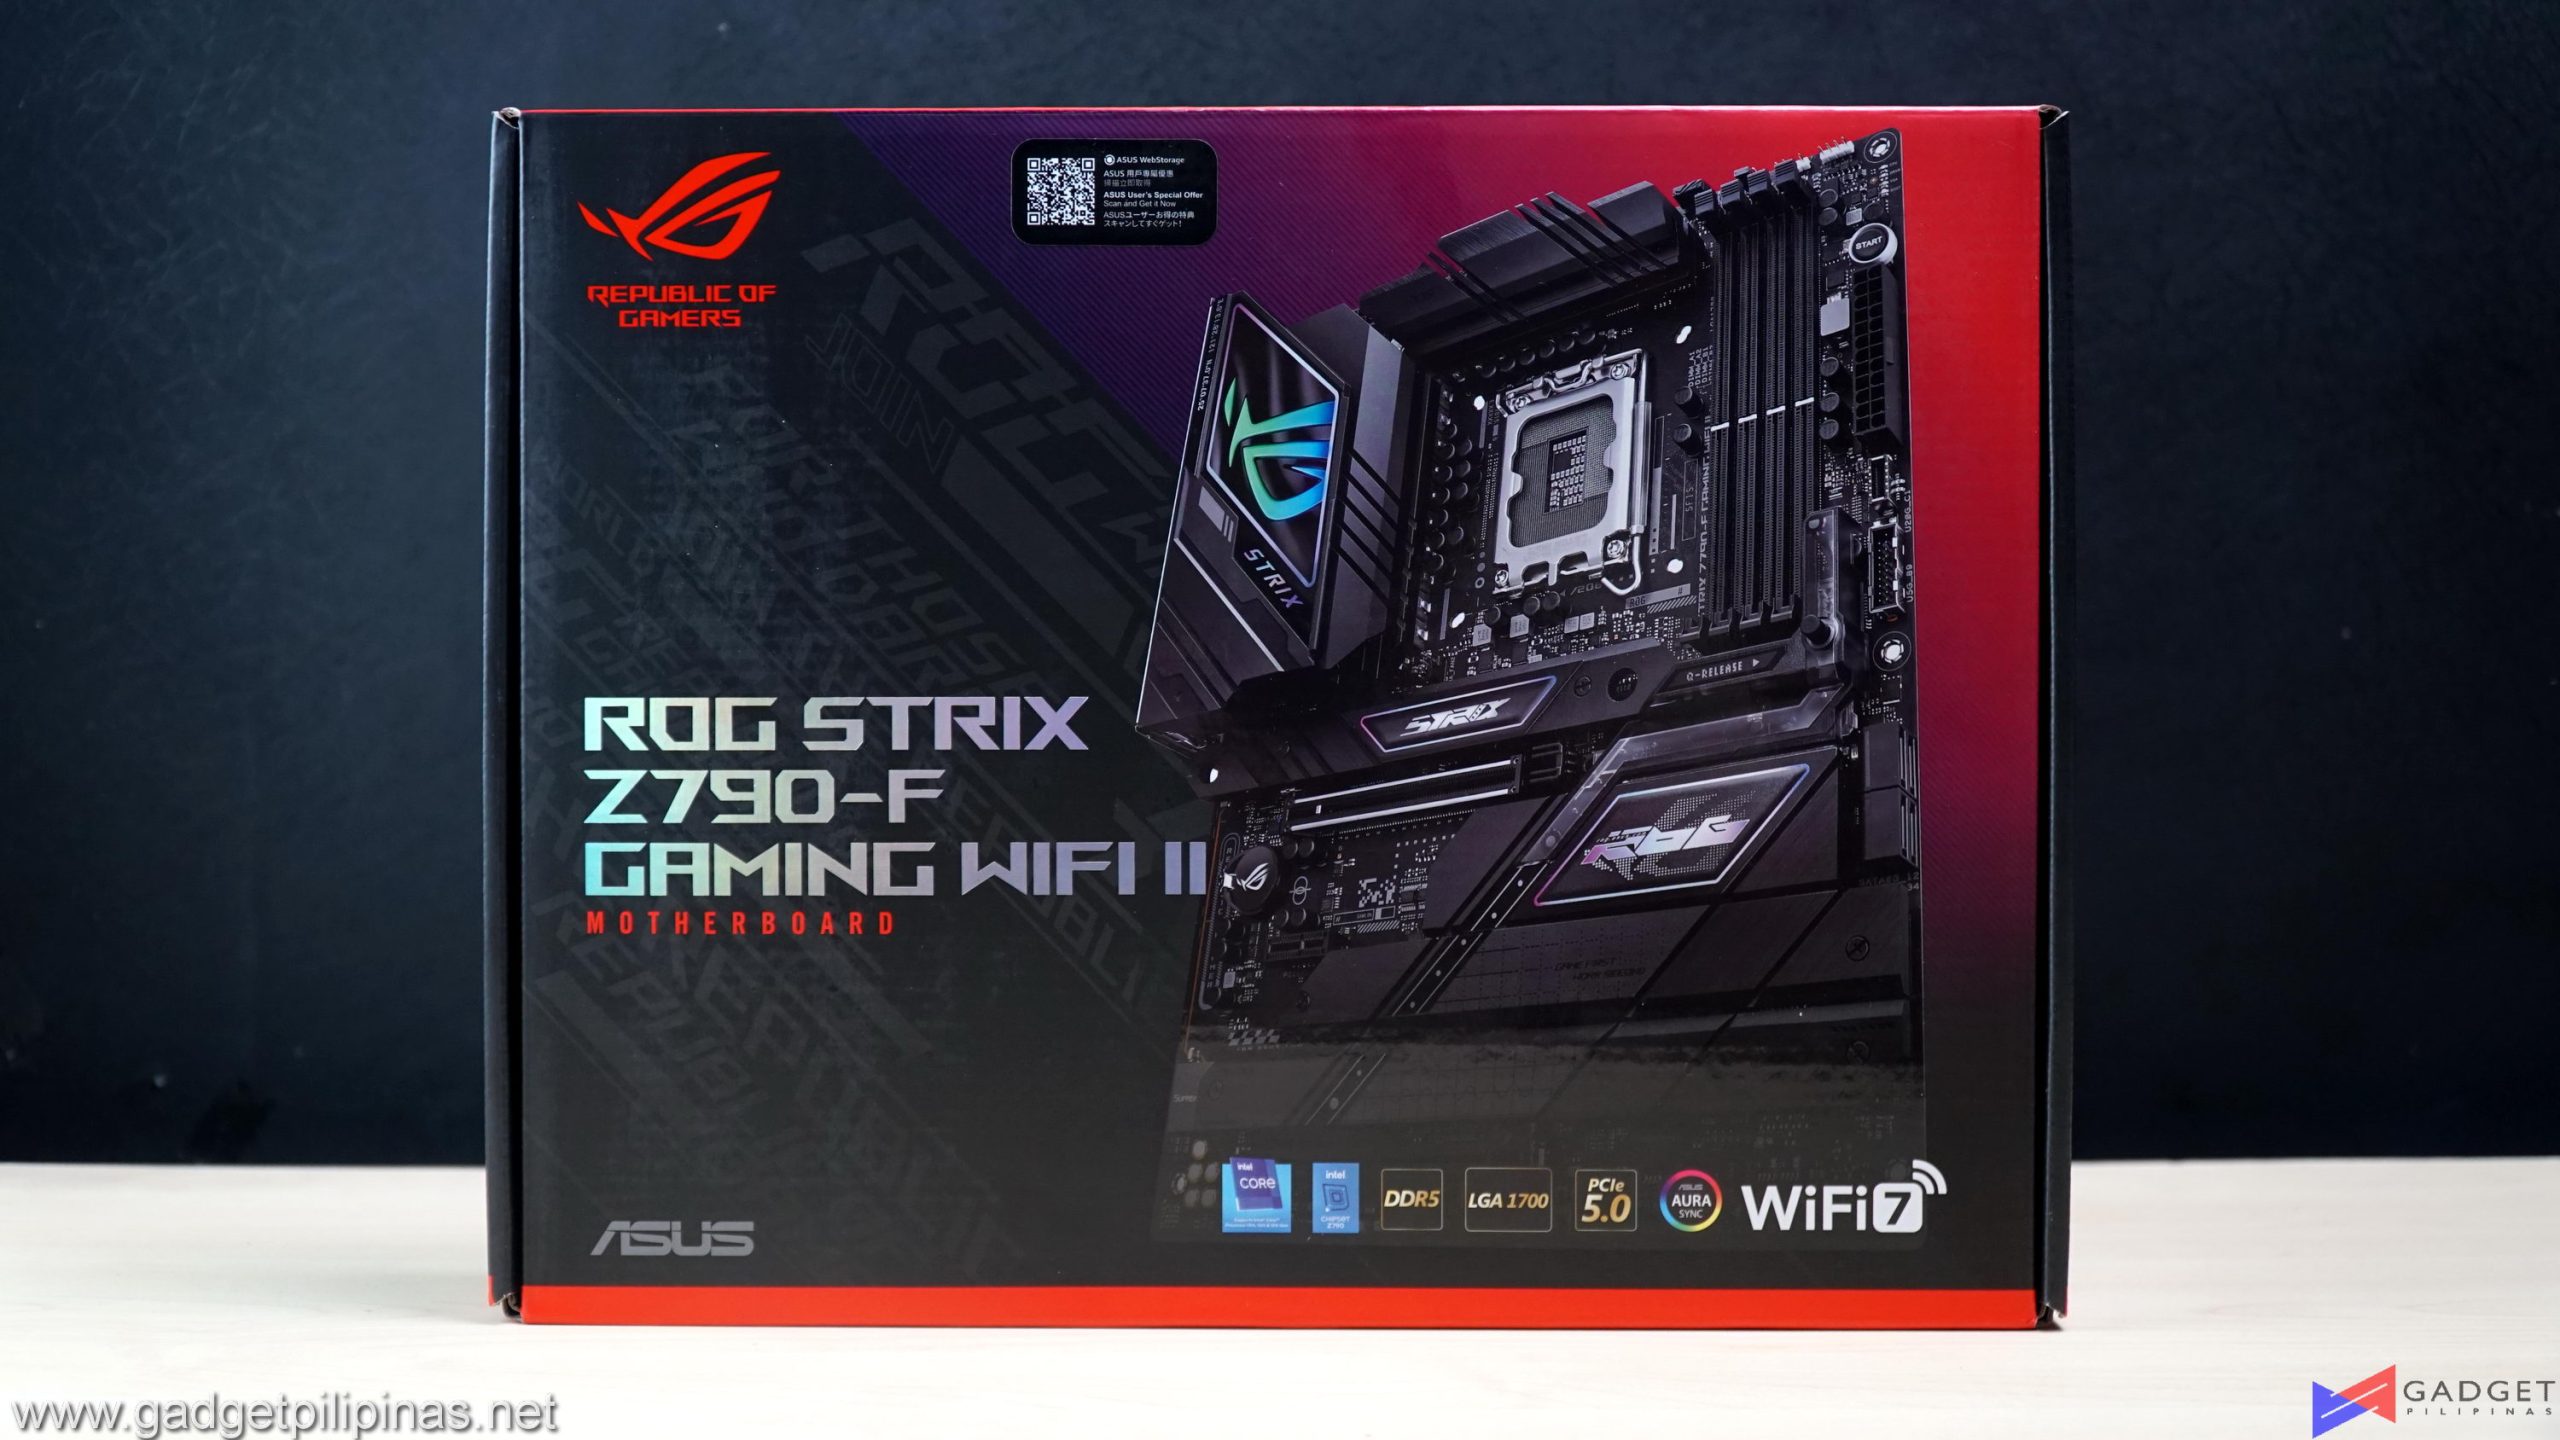 ASUS ROG Strix Z790-F Gaming WiFi II Motherboard Review - Better